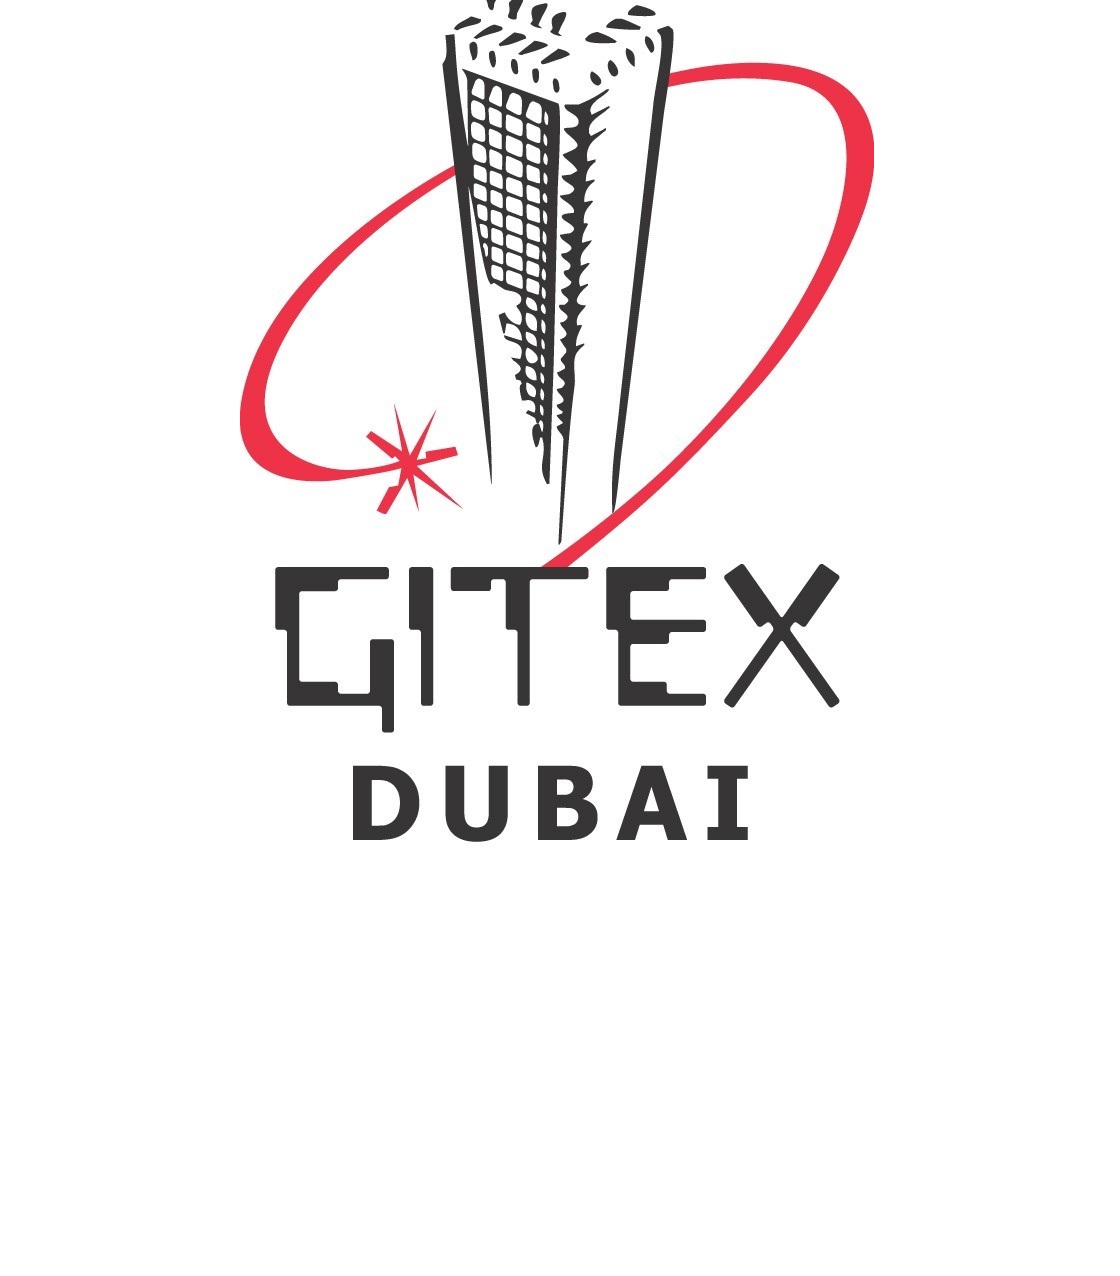 16 Pakistani IT firms to participate in GITEX